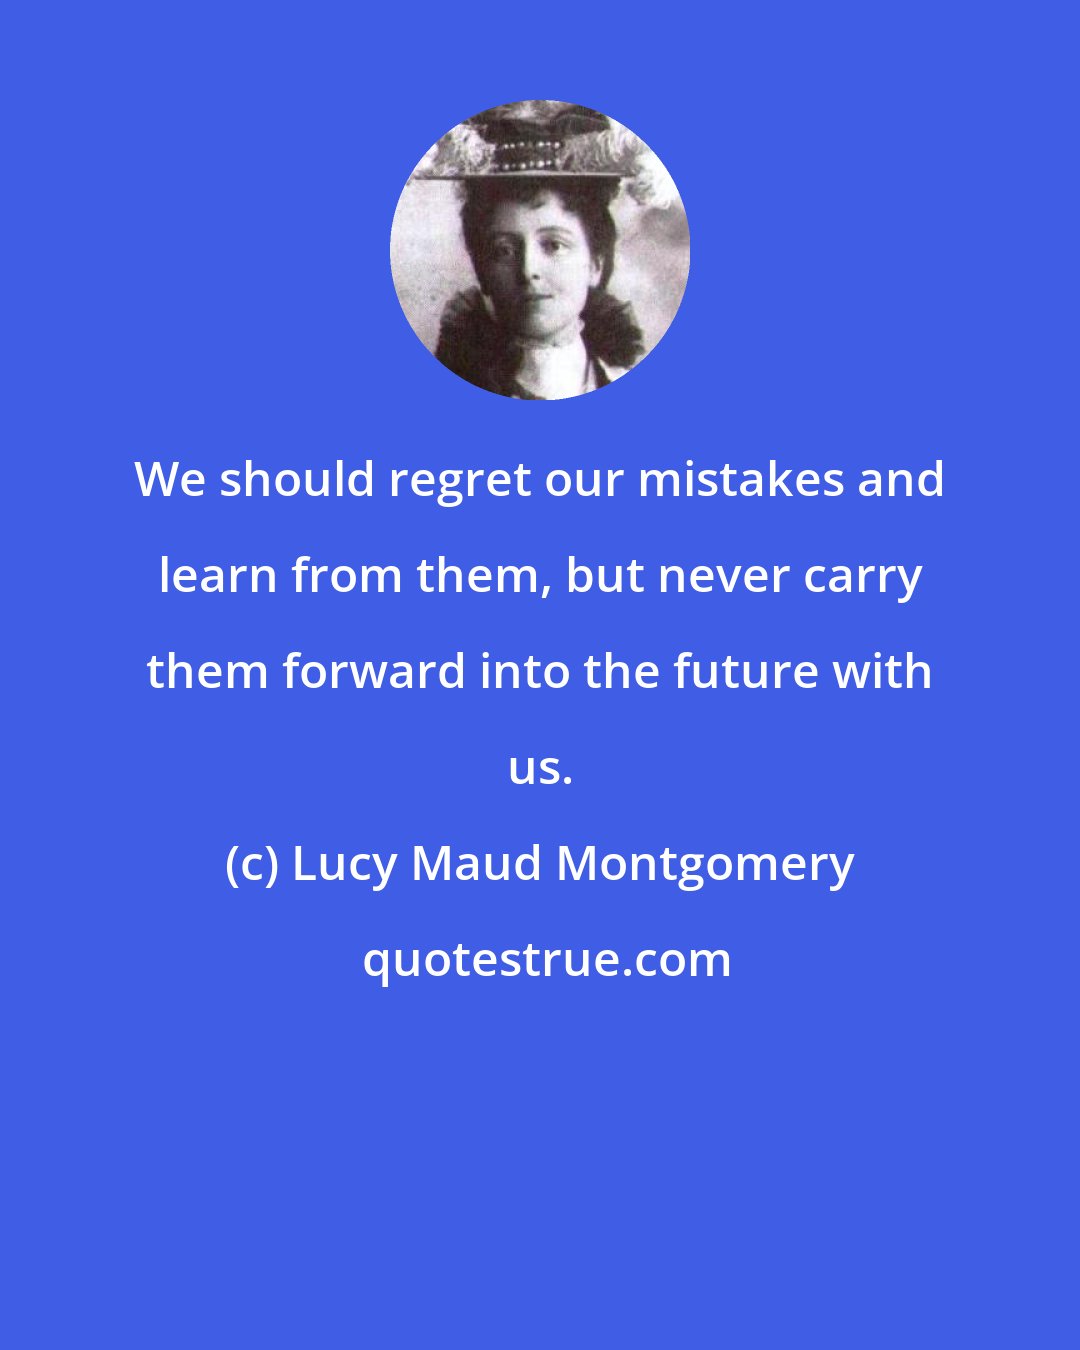 Lucy Maud Montgomery: We should regret our mistakes and learn from them, but never carry them forward into the future with us.